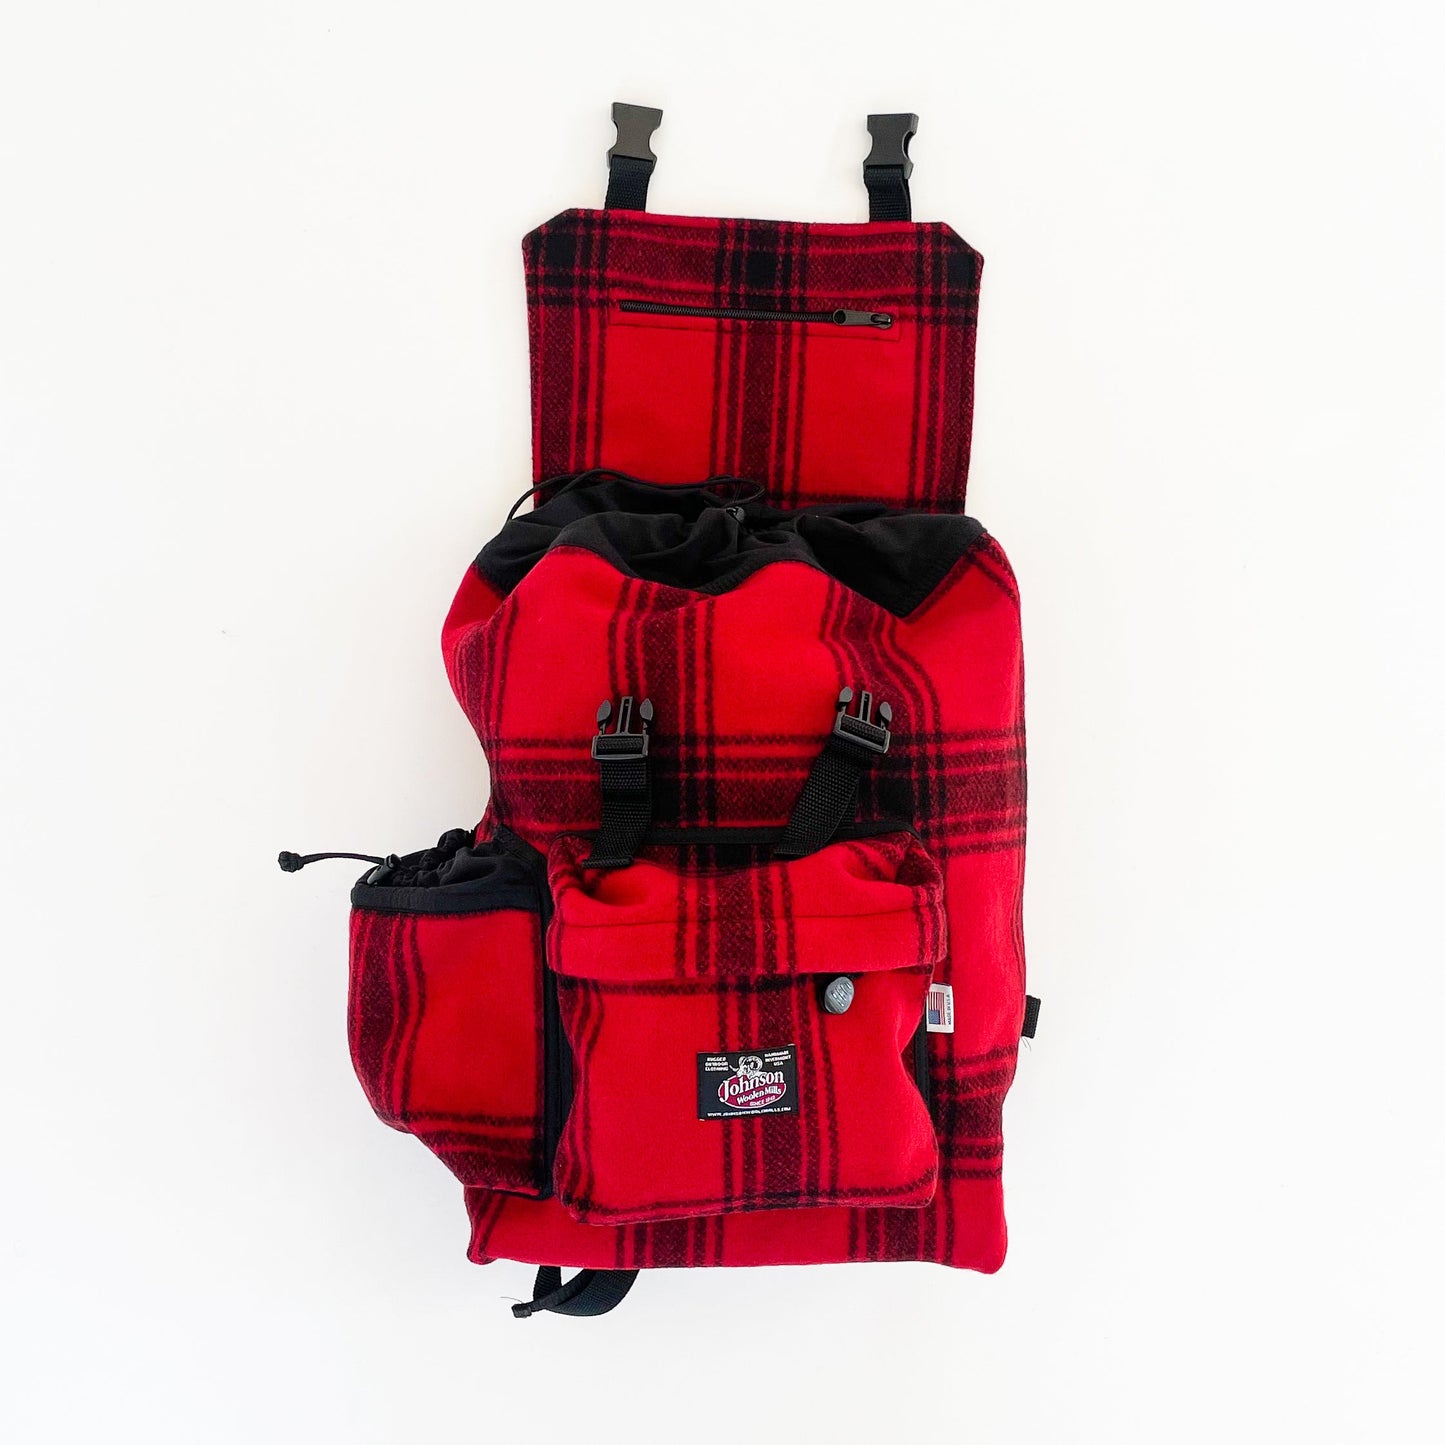 Johnson Woolen Mills Daypack Bright Red & Black Muted Plaid front view with water bottle in side pocket and top flap open